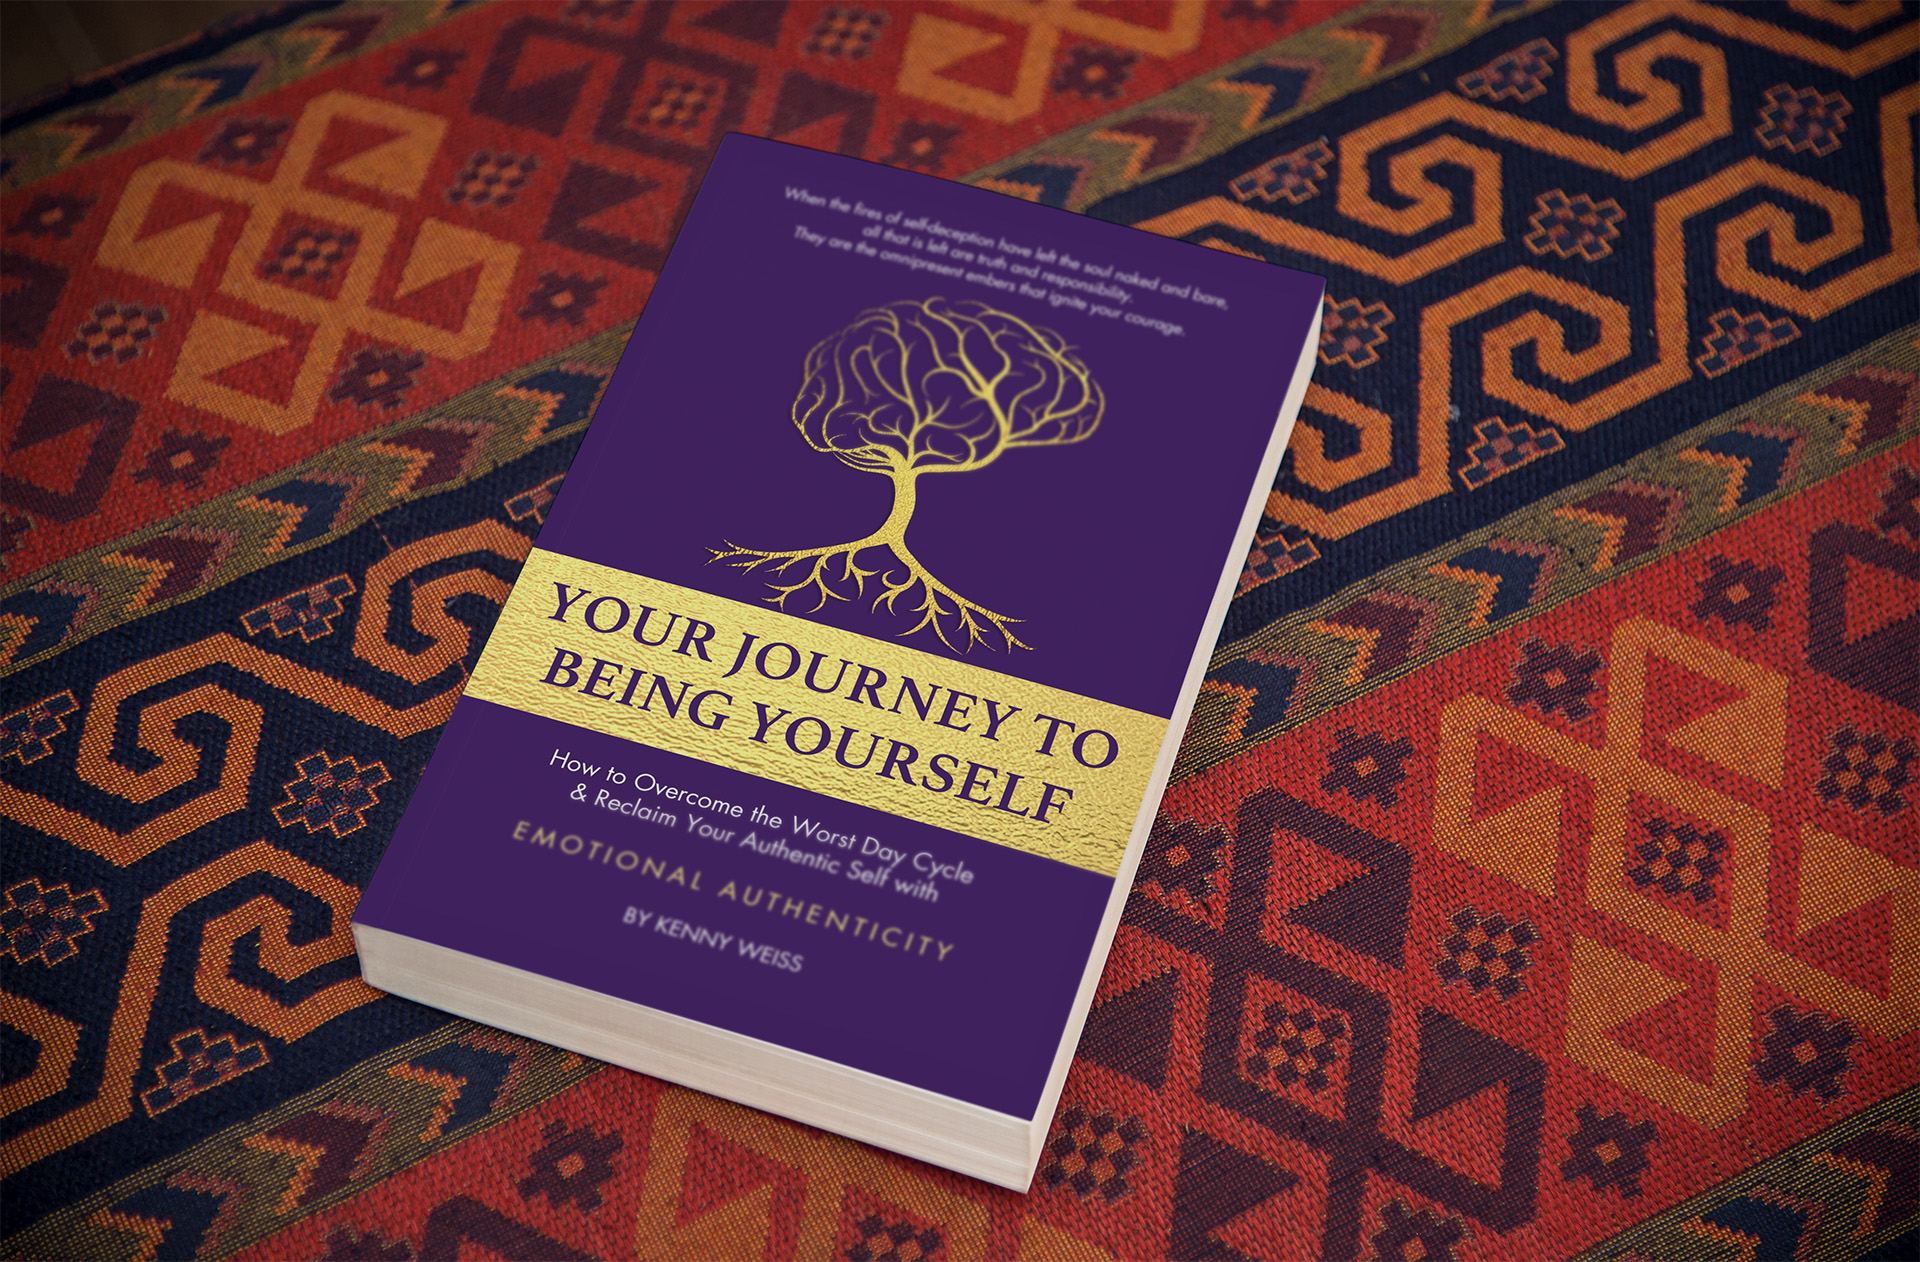 Your Journey to Being Yourself Book on floor